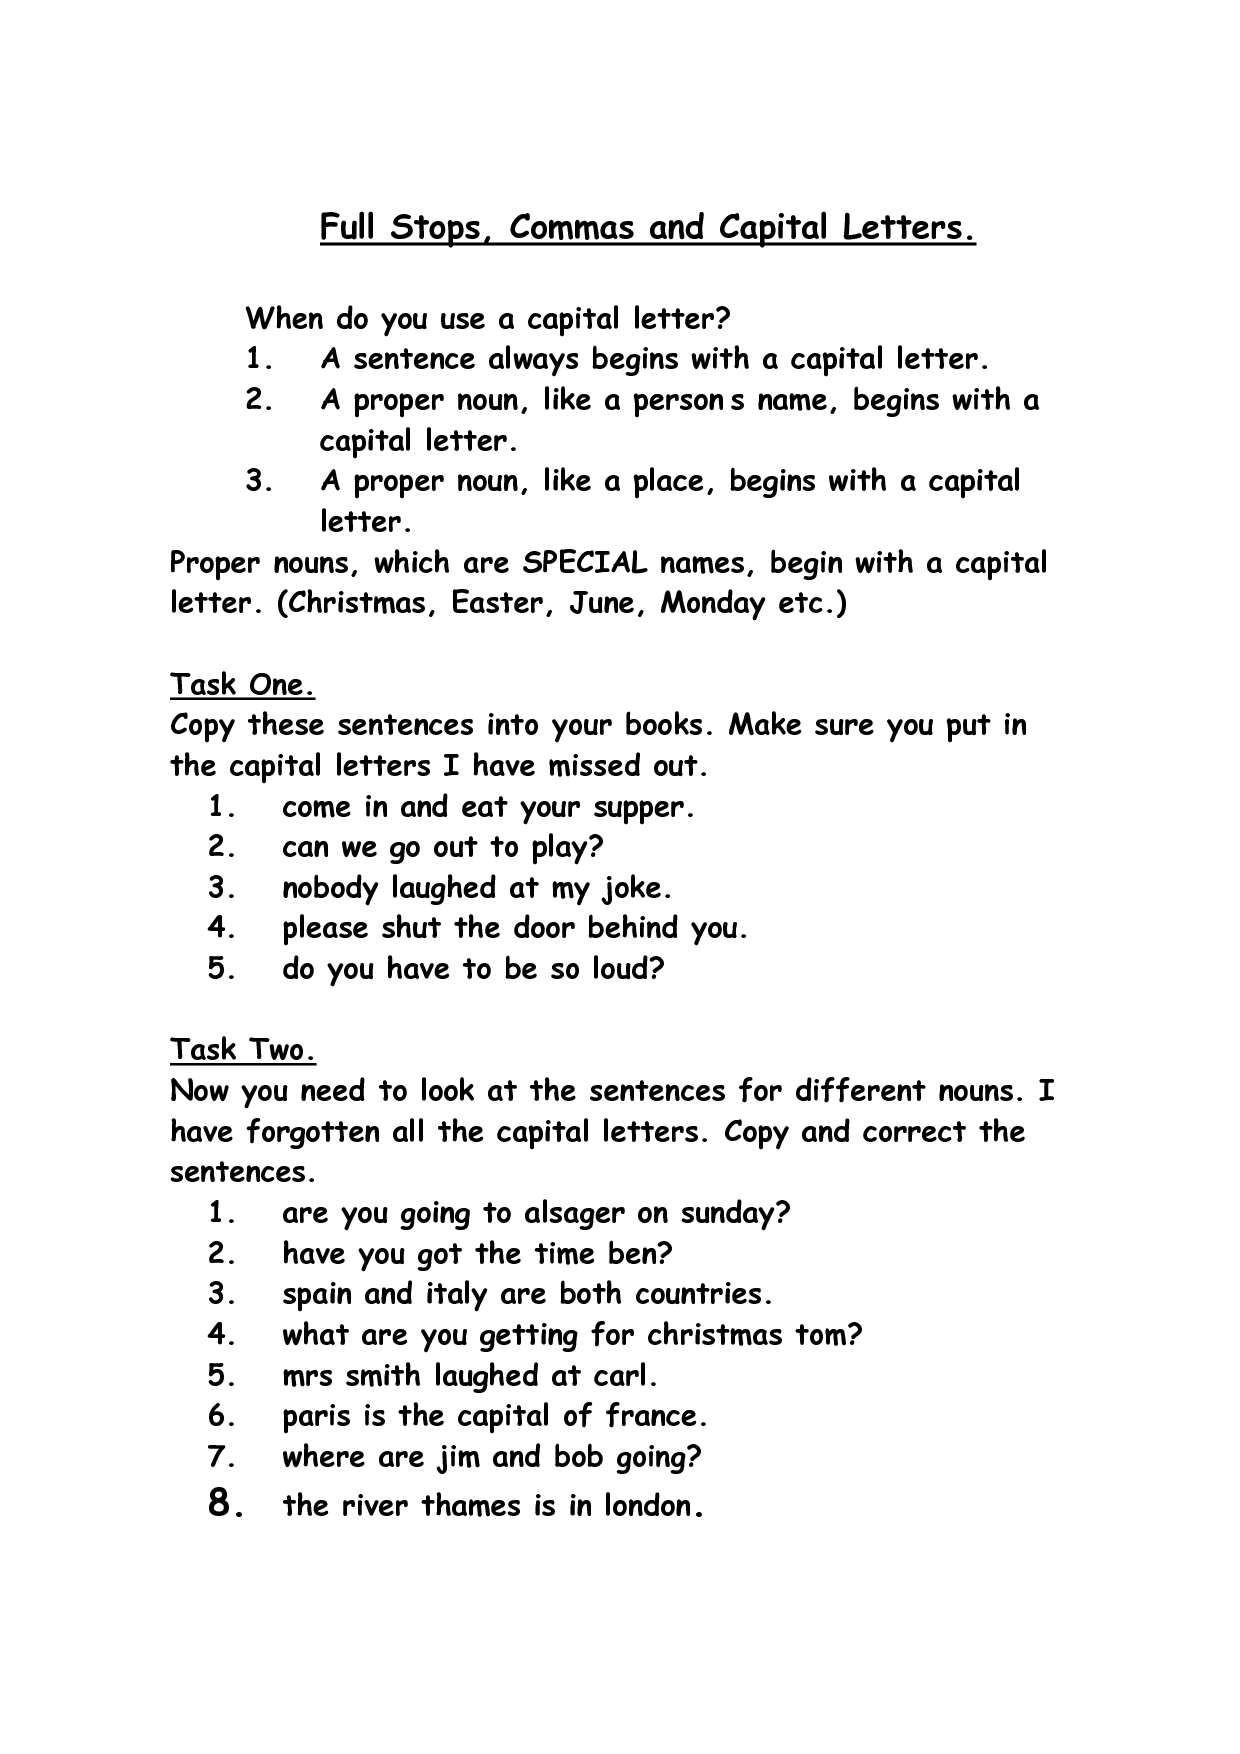 15-best-images-of-worksheets-capital-letters-and-full-stop-capital-letters-worksheet-capital